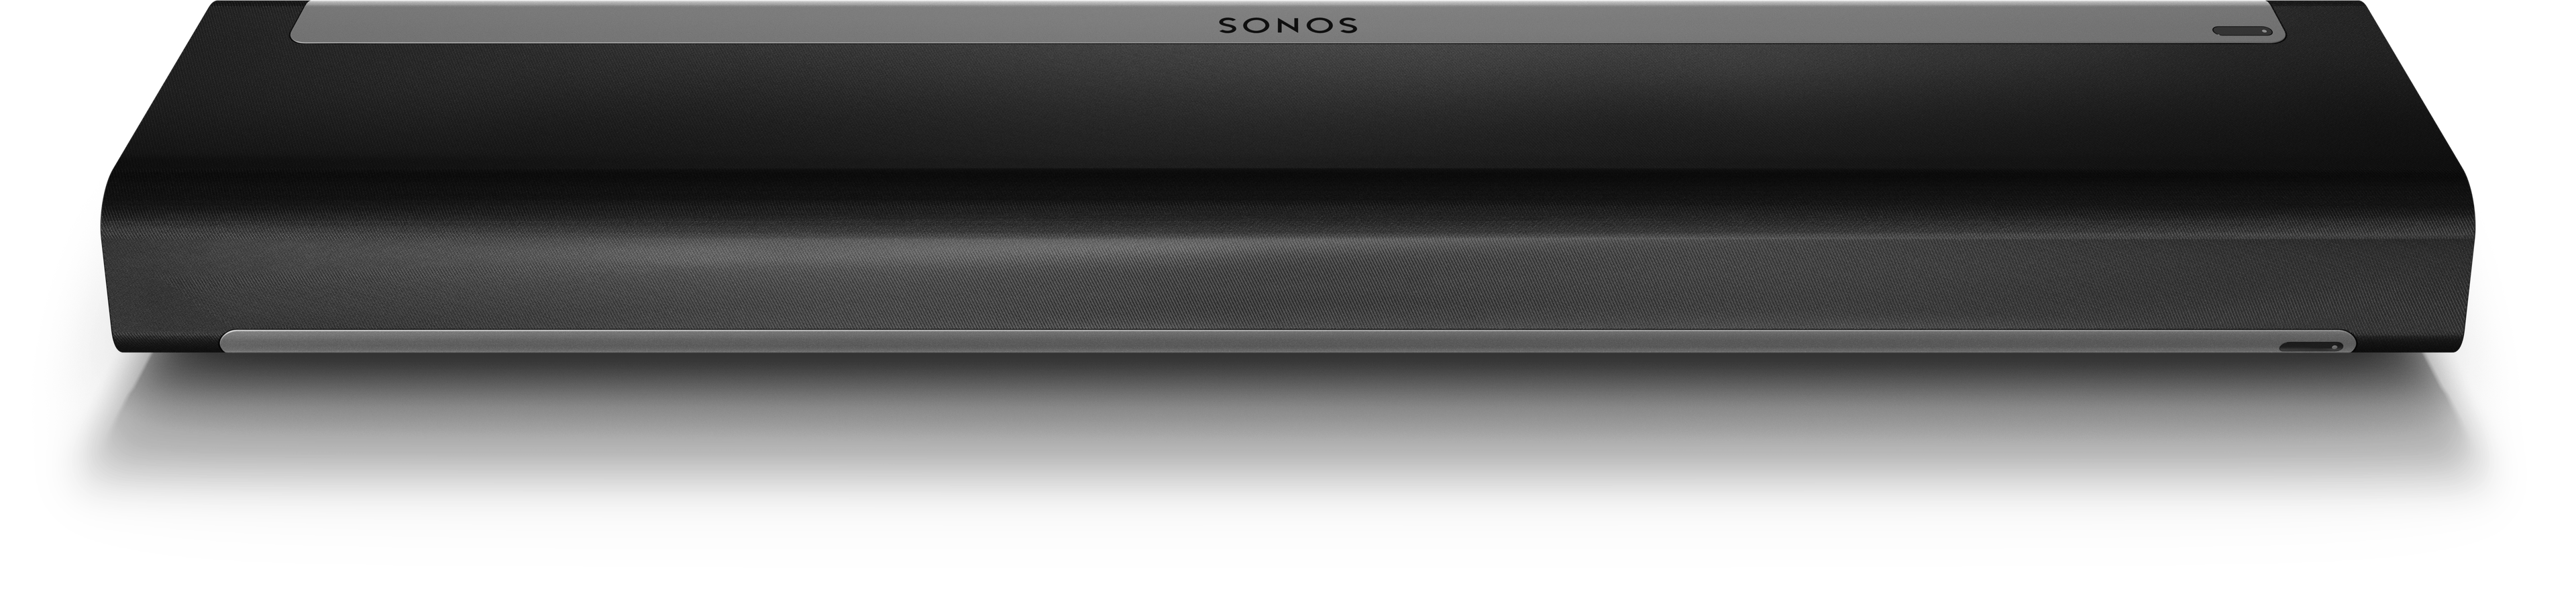 up your Sonos Playbar |